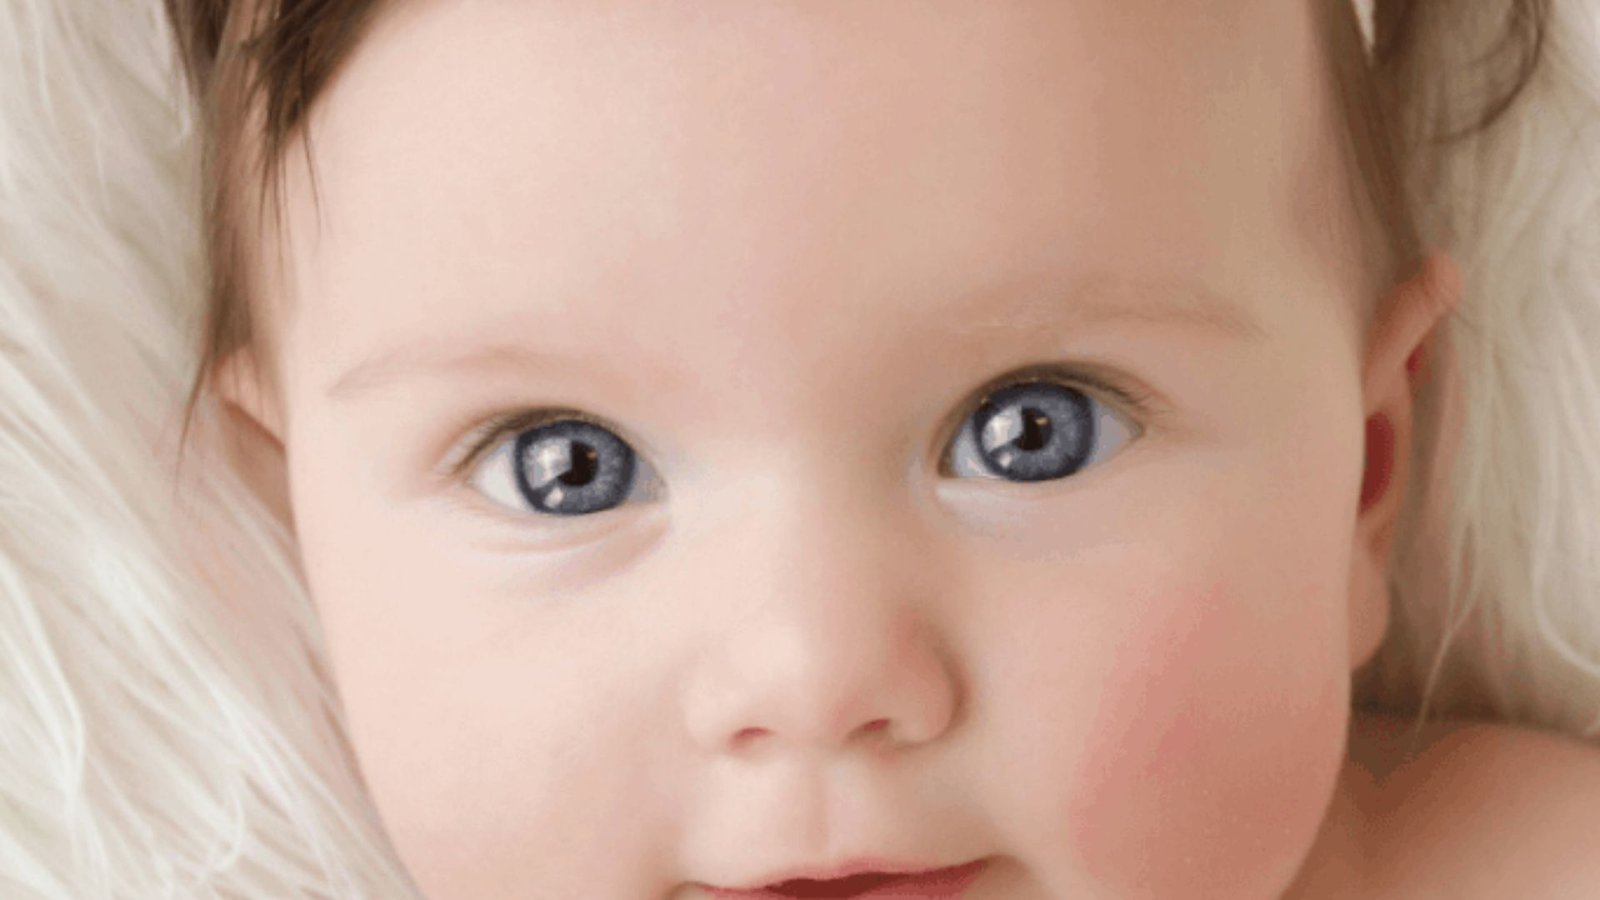 an image of a baby